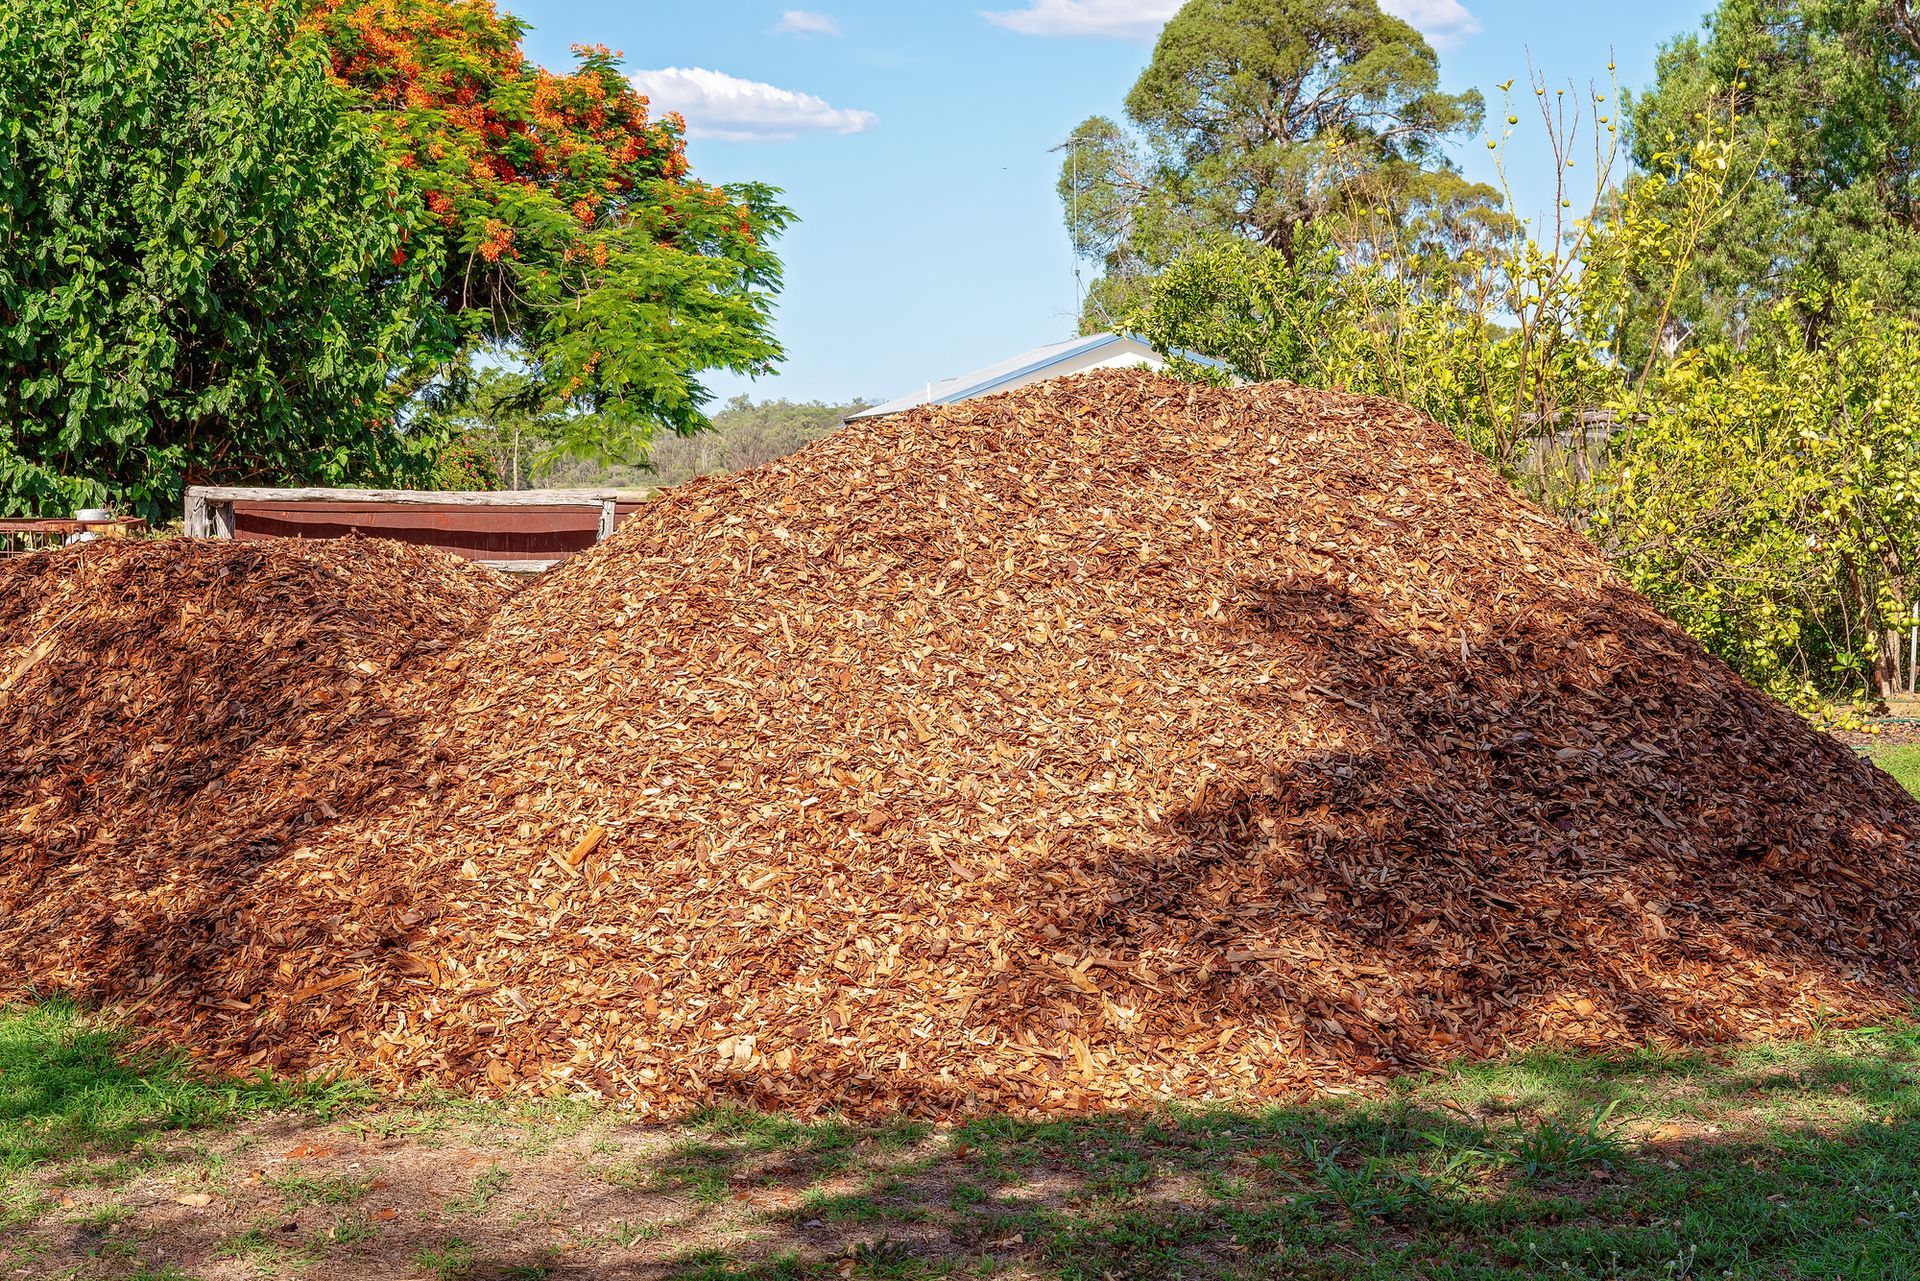 Wood Chipping Services in Sebastopol, CA